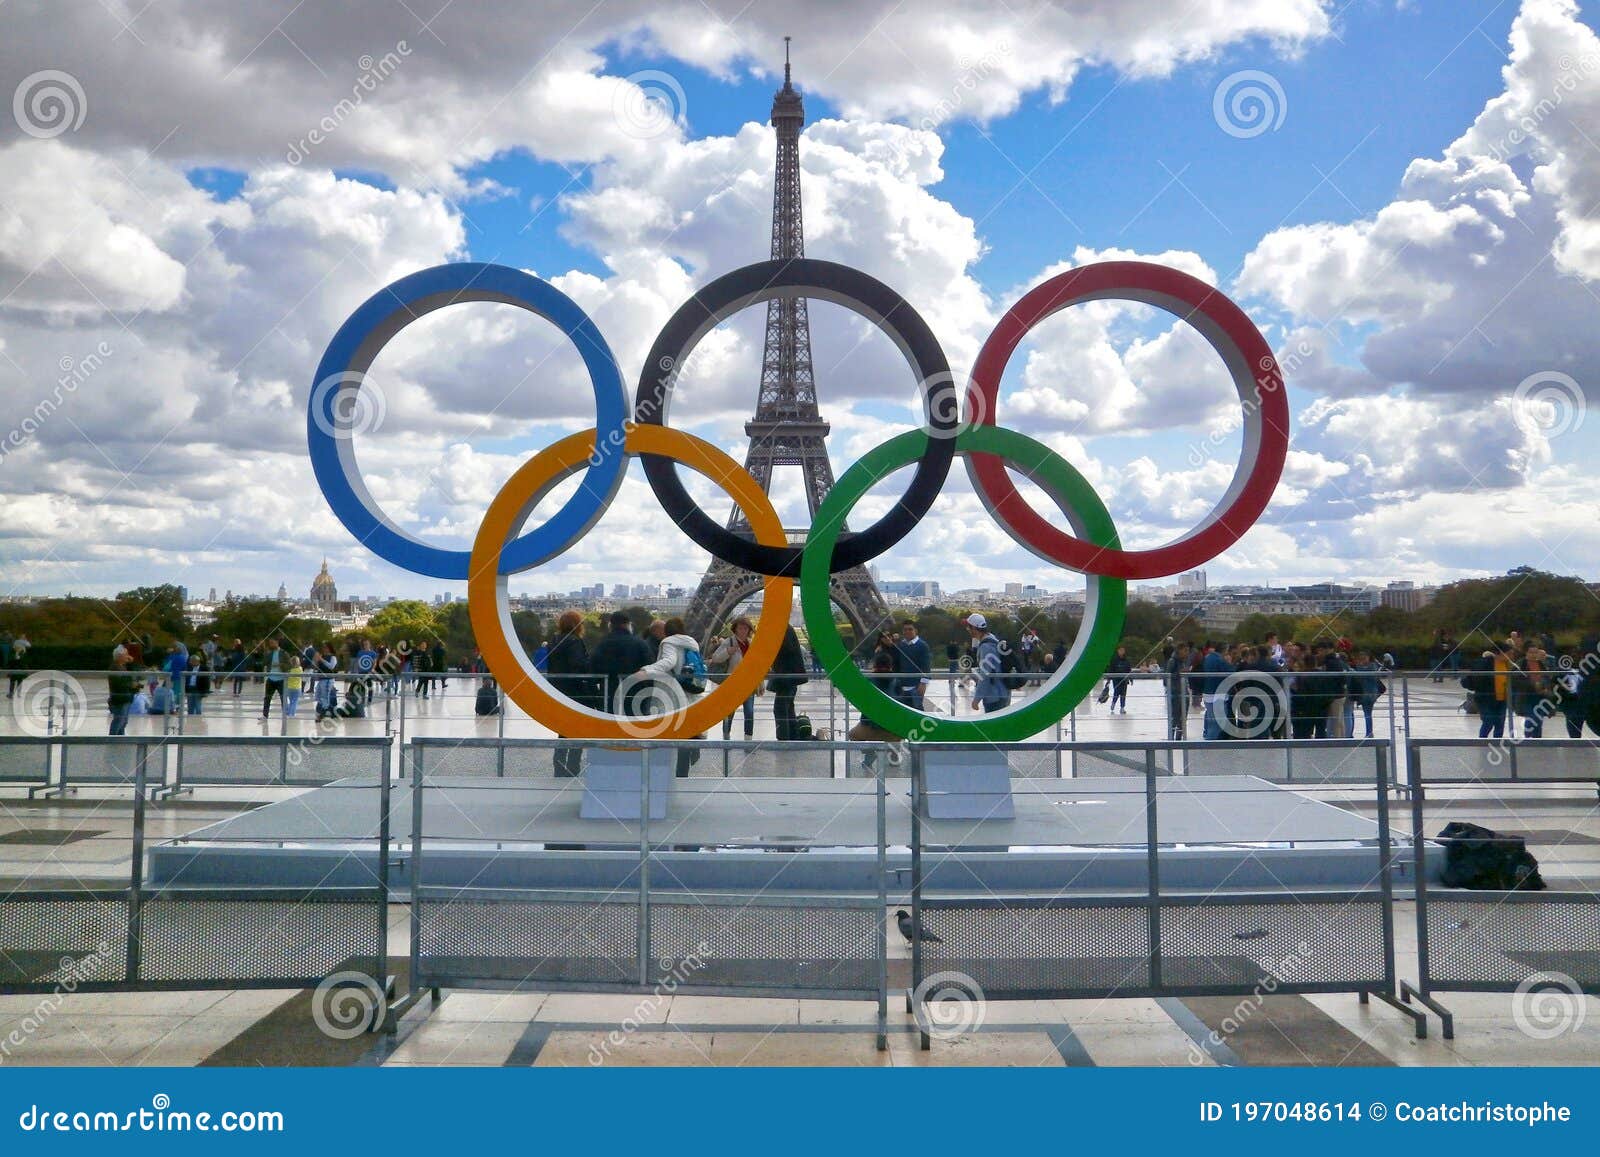 3d Illustration Olympic Rings The Iconic Symbol Of The Olympic Games  Background, Olympic, Olympic Sports, Sports Badge Background Image And  Wallpaper for Free Download